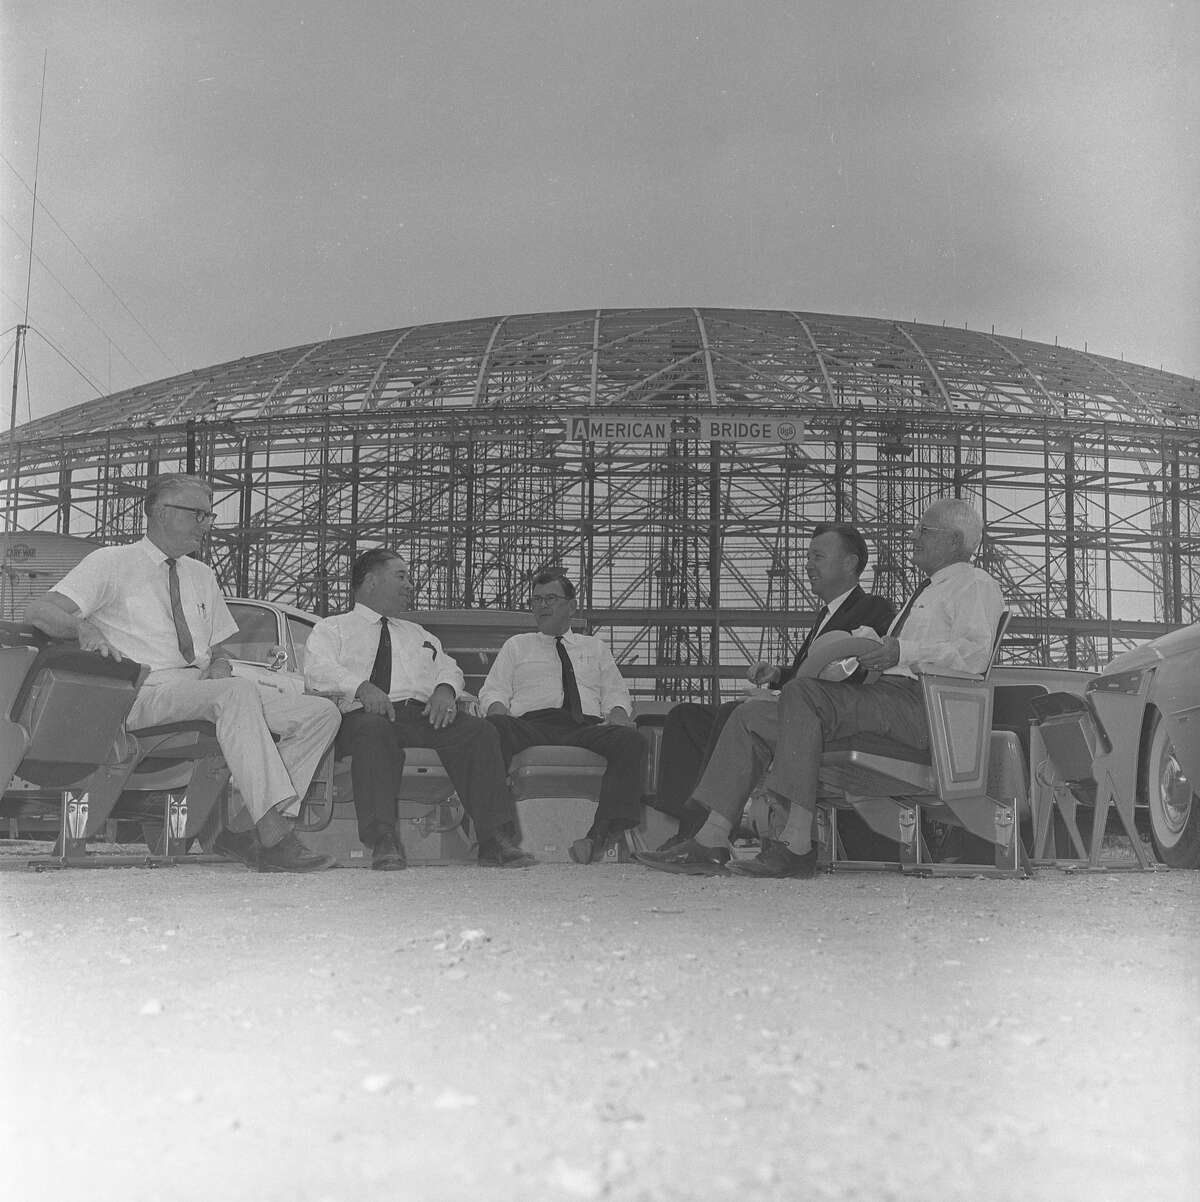 October 1963: Harris County commissioners check out stadium seats for the to-be-completed domed stadium (Astrodome). commissioners V.V. (Red) Ramsey, E.A. (Squatty) Lyons, W. Kyle Chapman, County Judge Bill Elliott, and commissioner Philip Sayers.